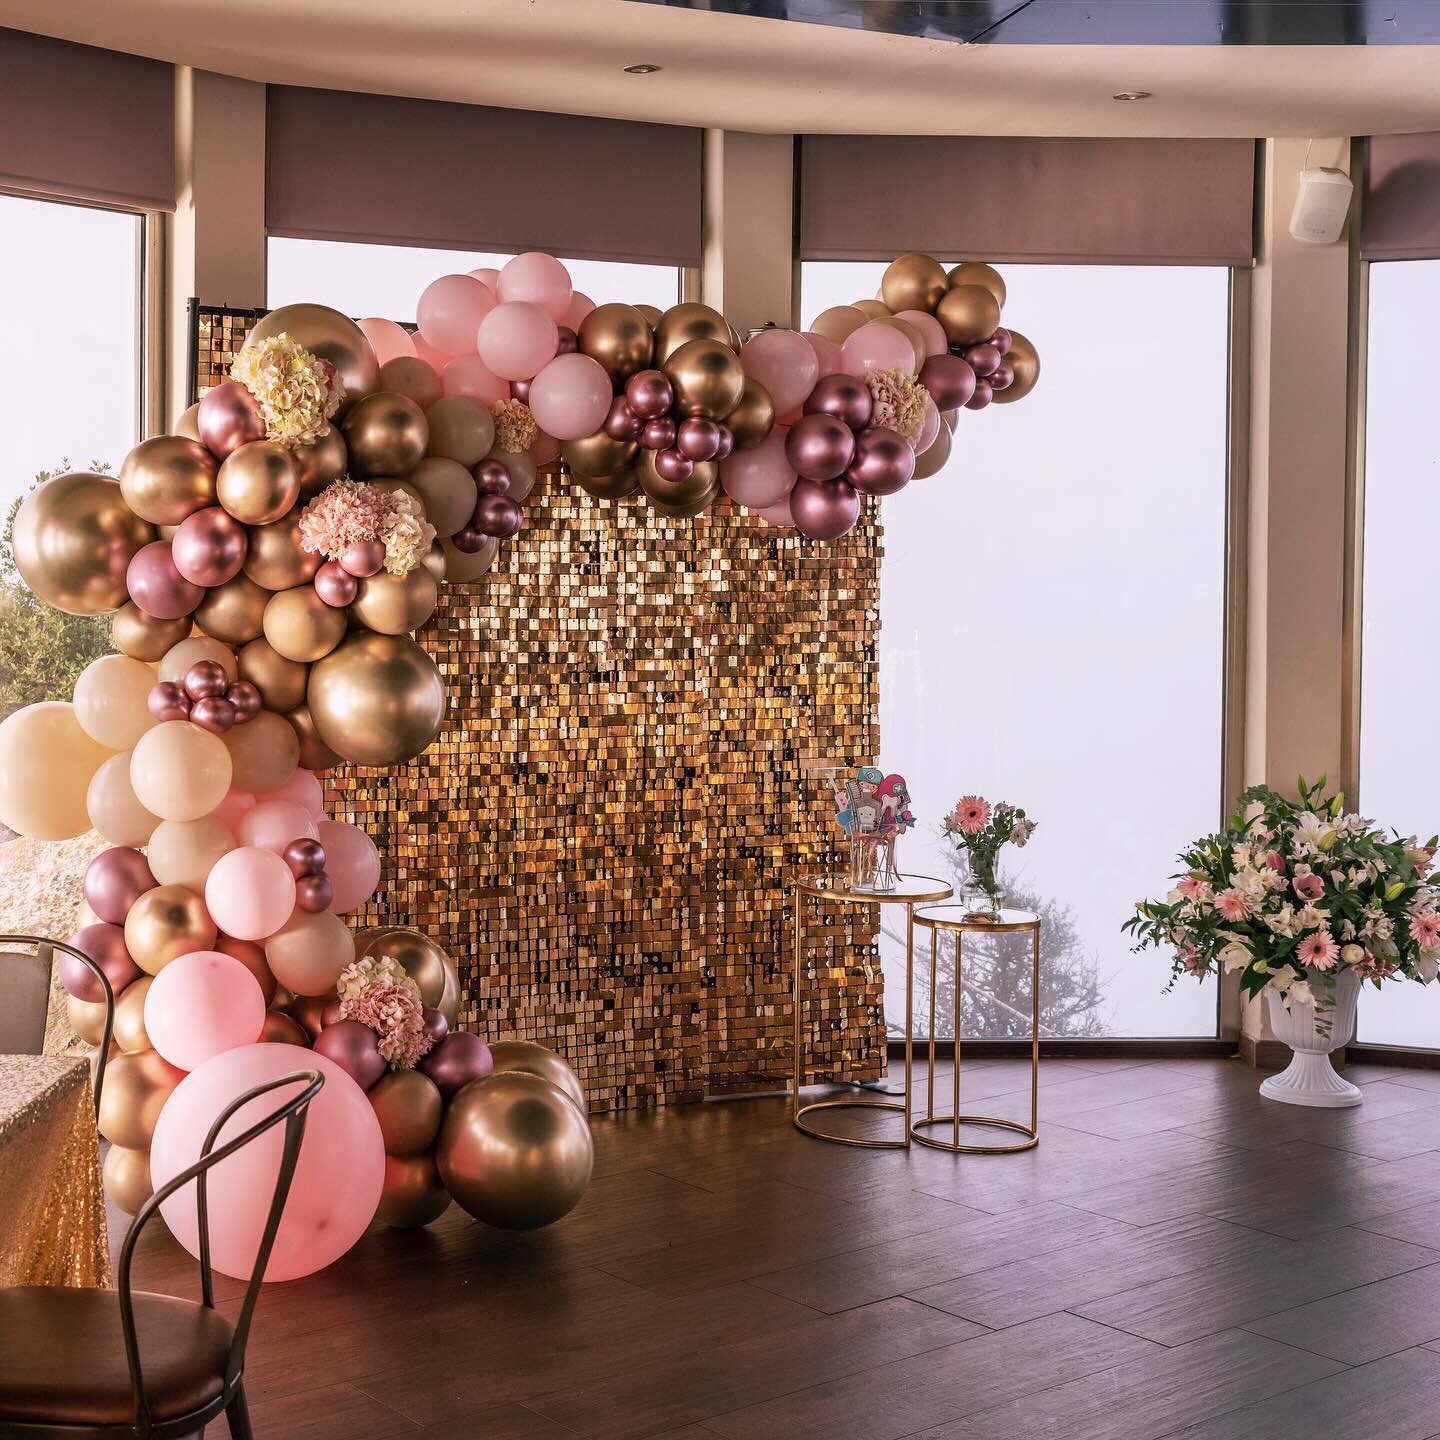 Are you preparing for your child&rsquo;s communion party and want to make it look magical? Look no further! ✨
We have a stunning array of backdrops from elegant florals to timeless religious motifs to match your theme perfectly. 
DM us for details or